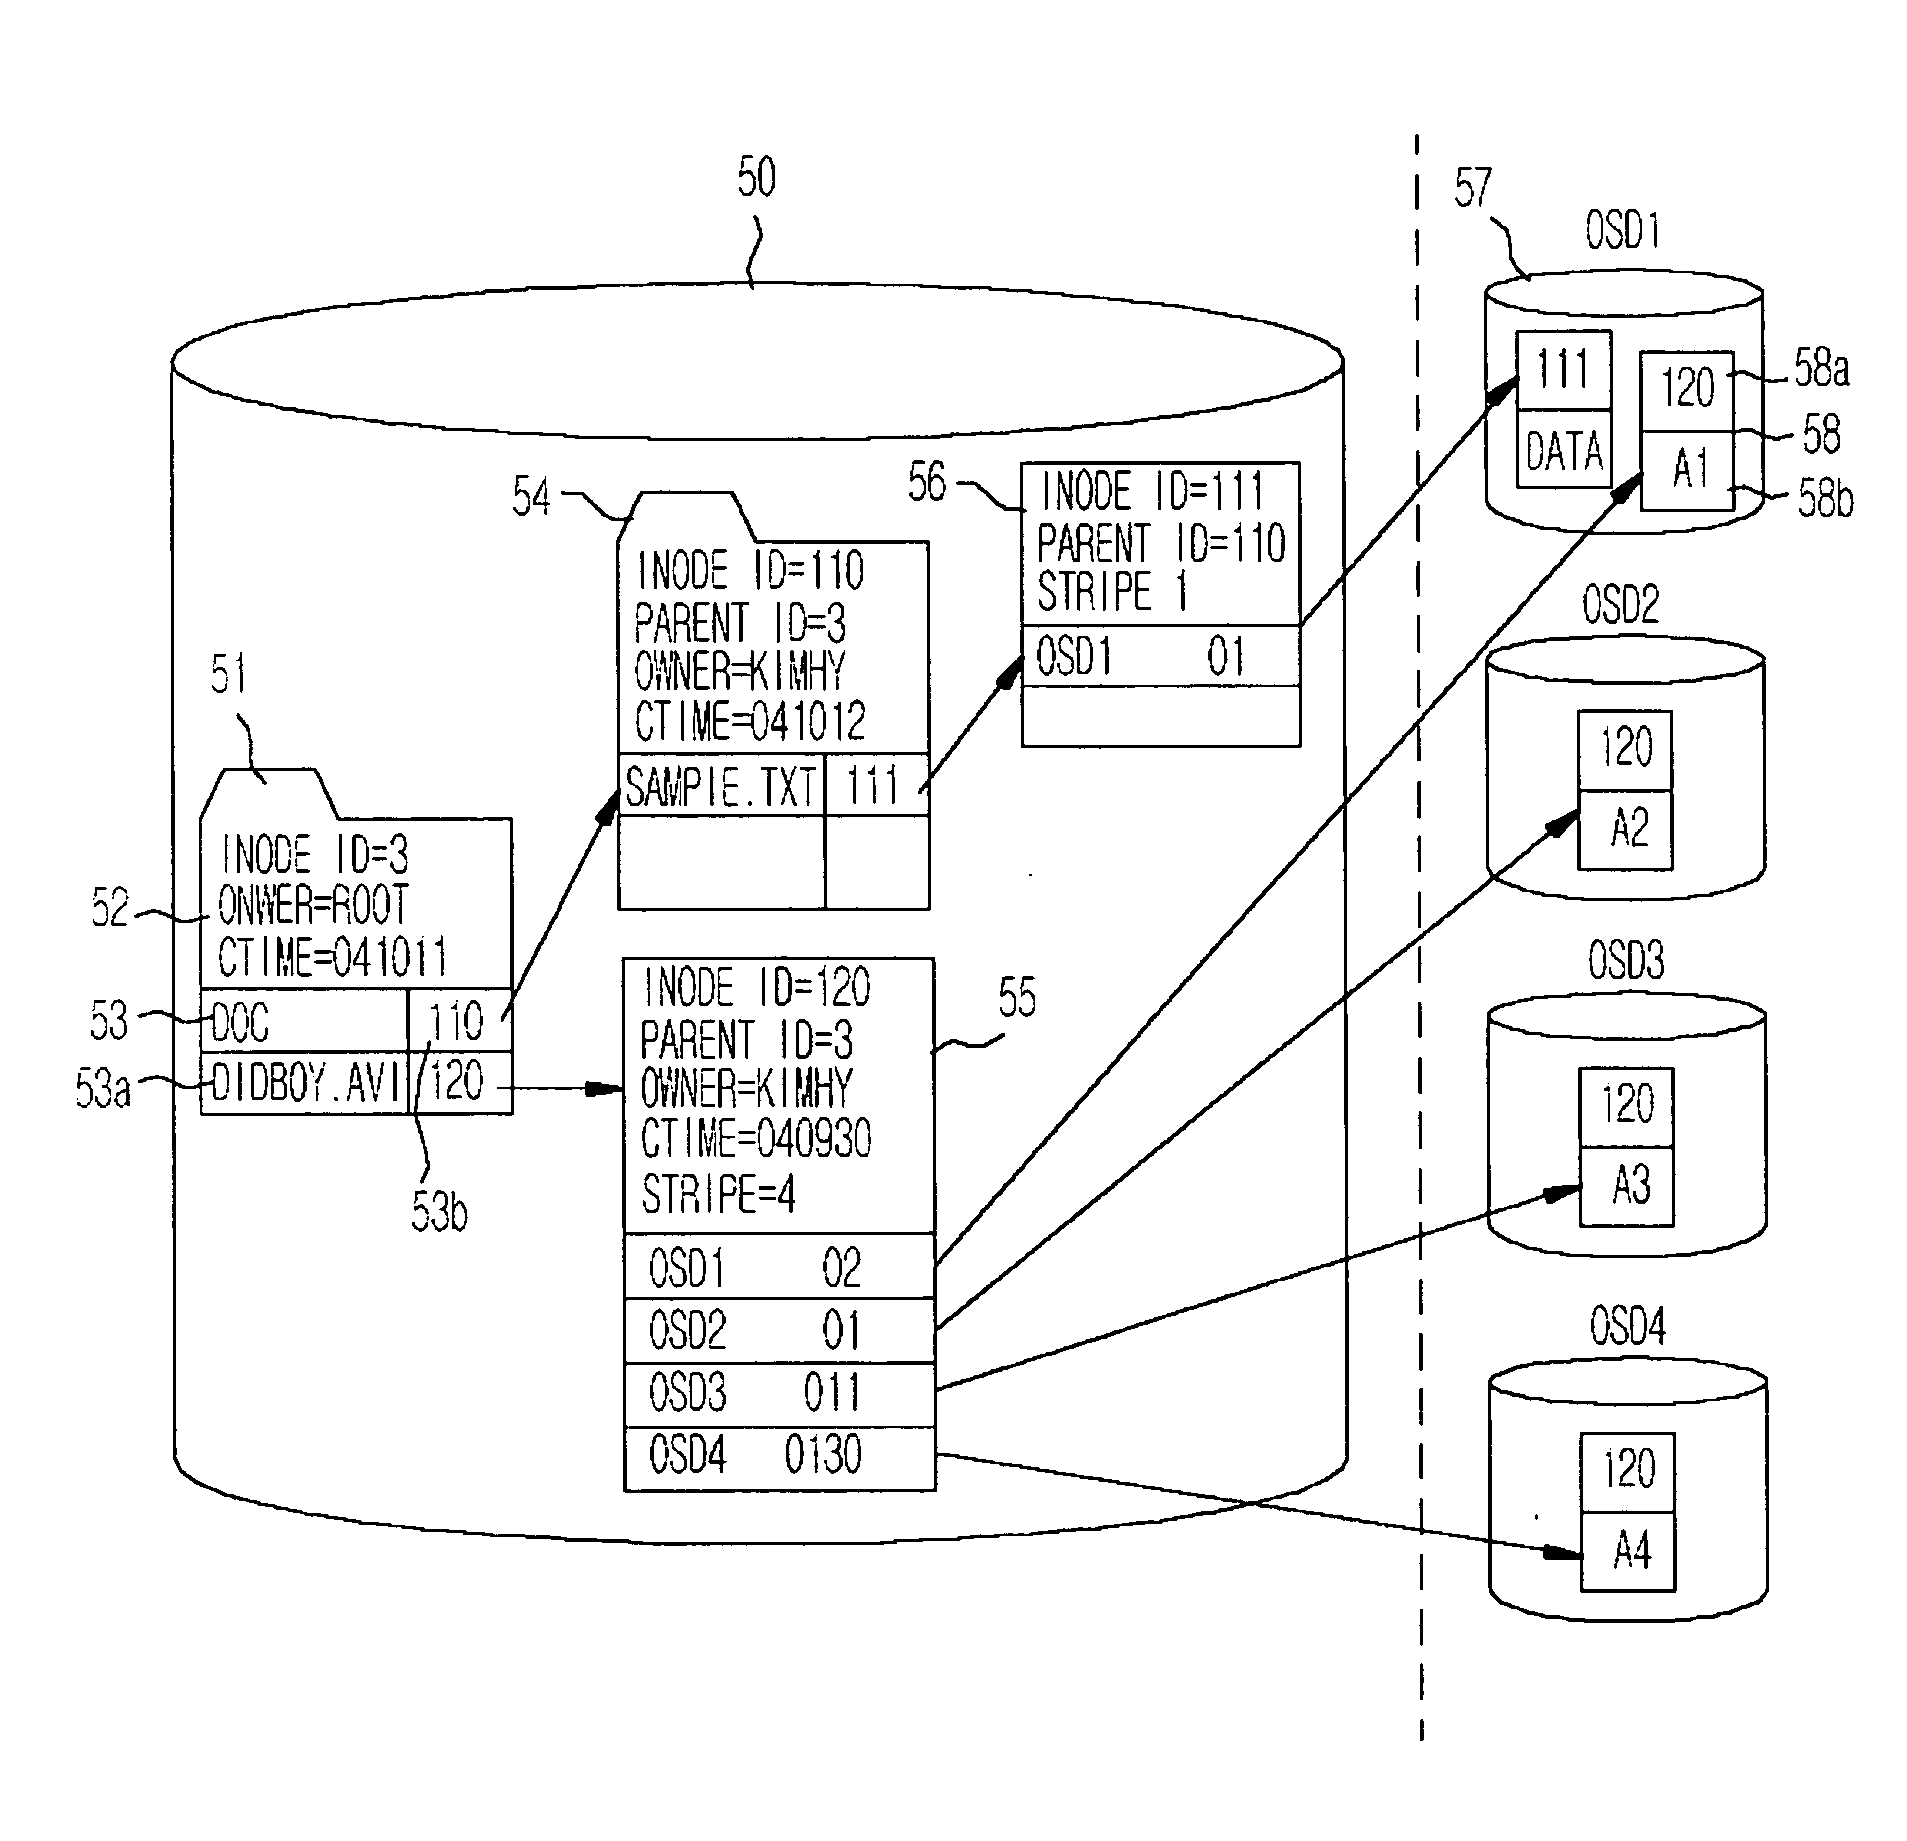 Crash recovery system and method for distributed file server using object based storage